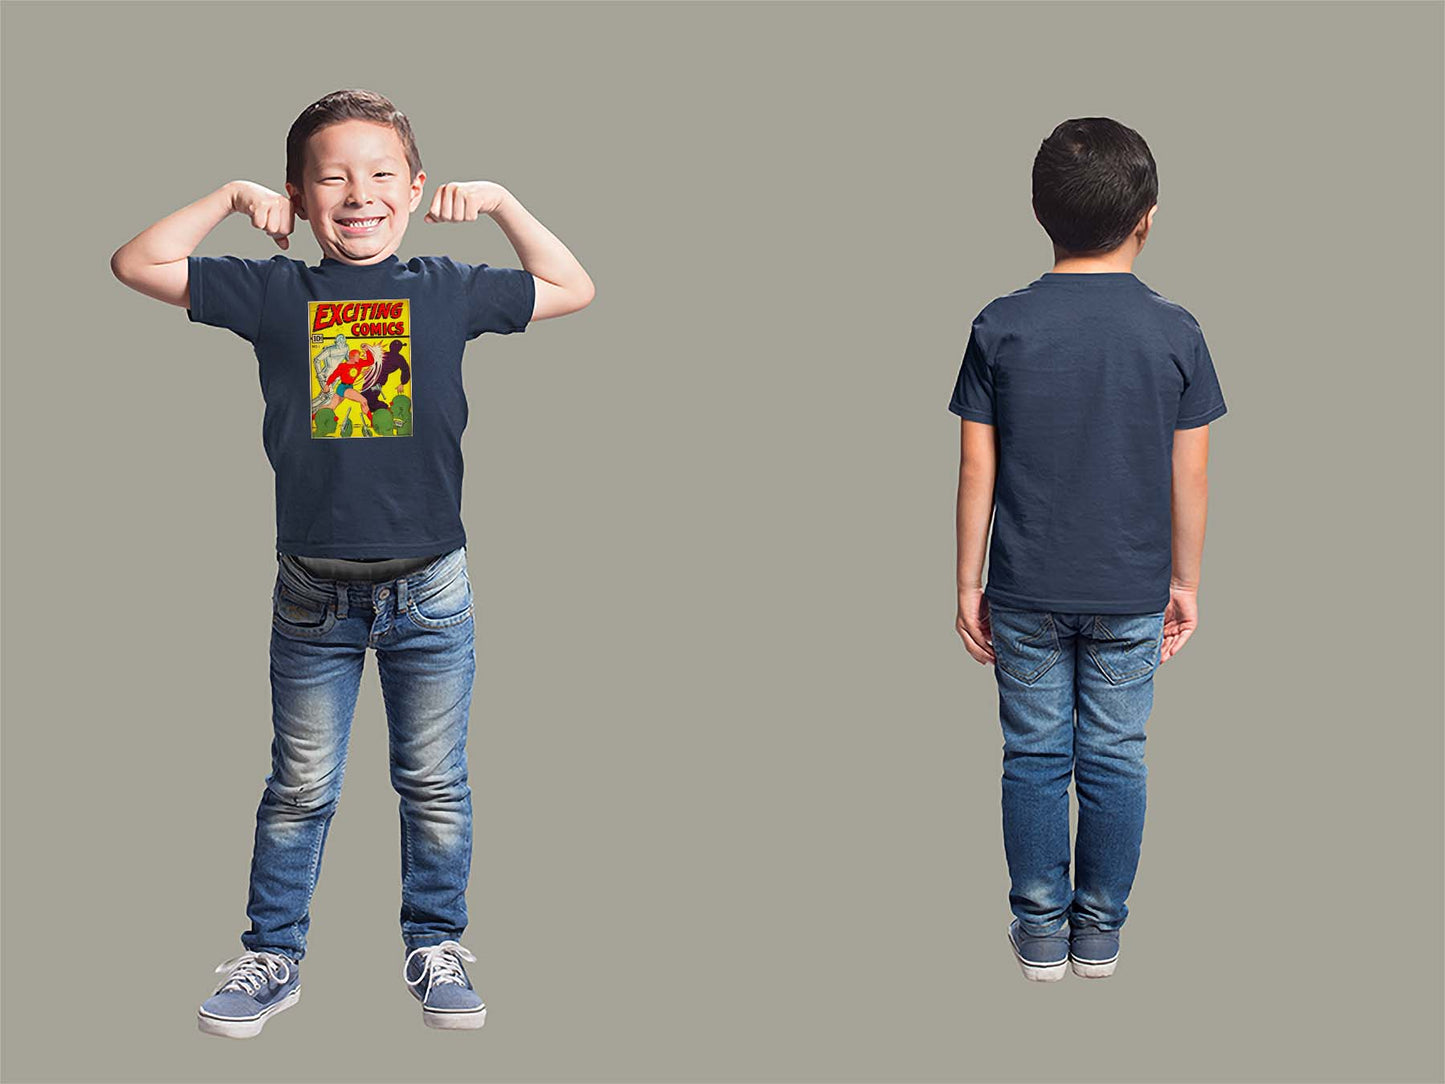 Exciting Comics No.1 Youth T-Shirt Youth Small Navy